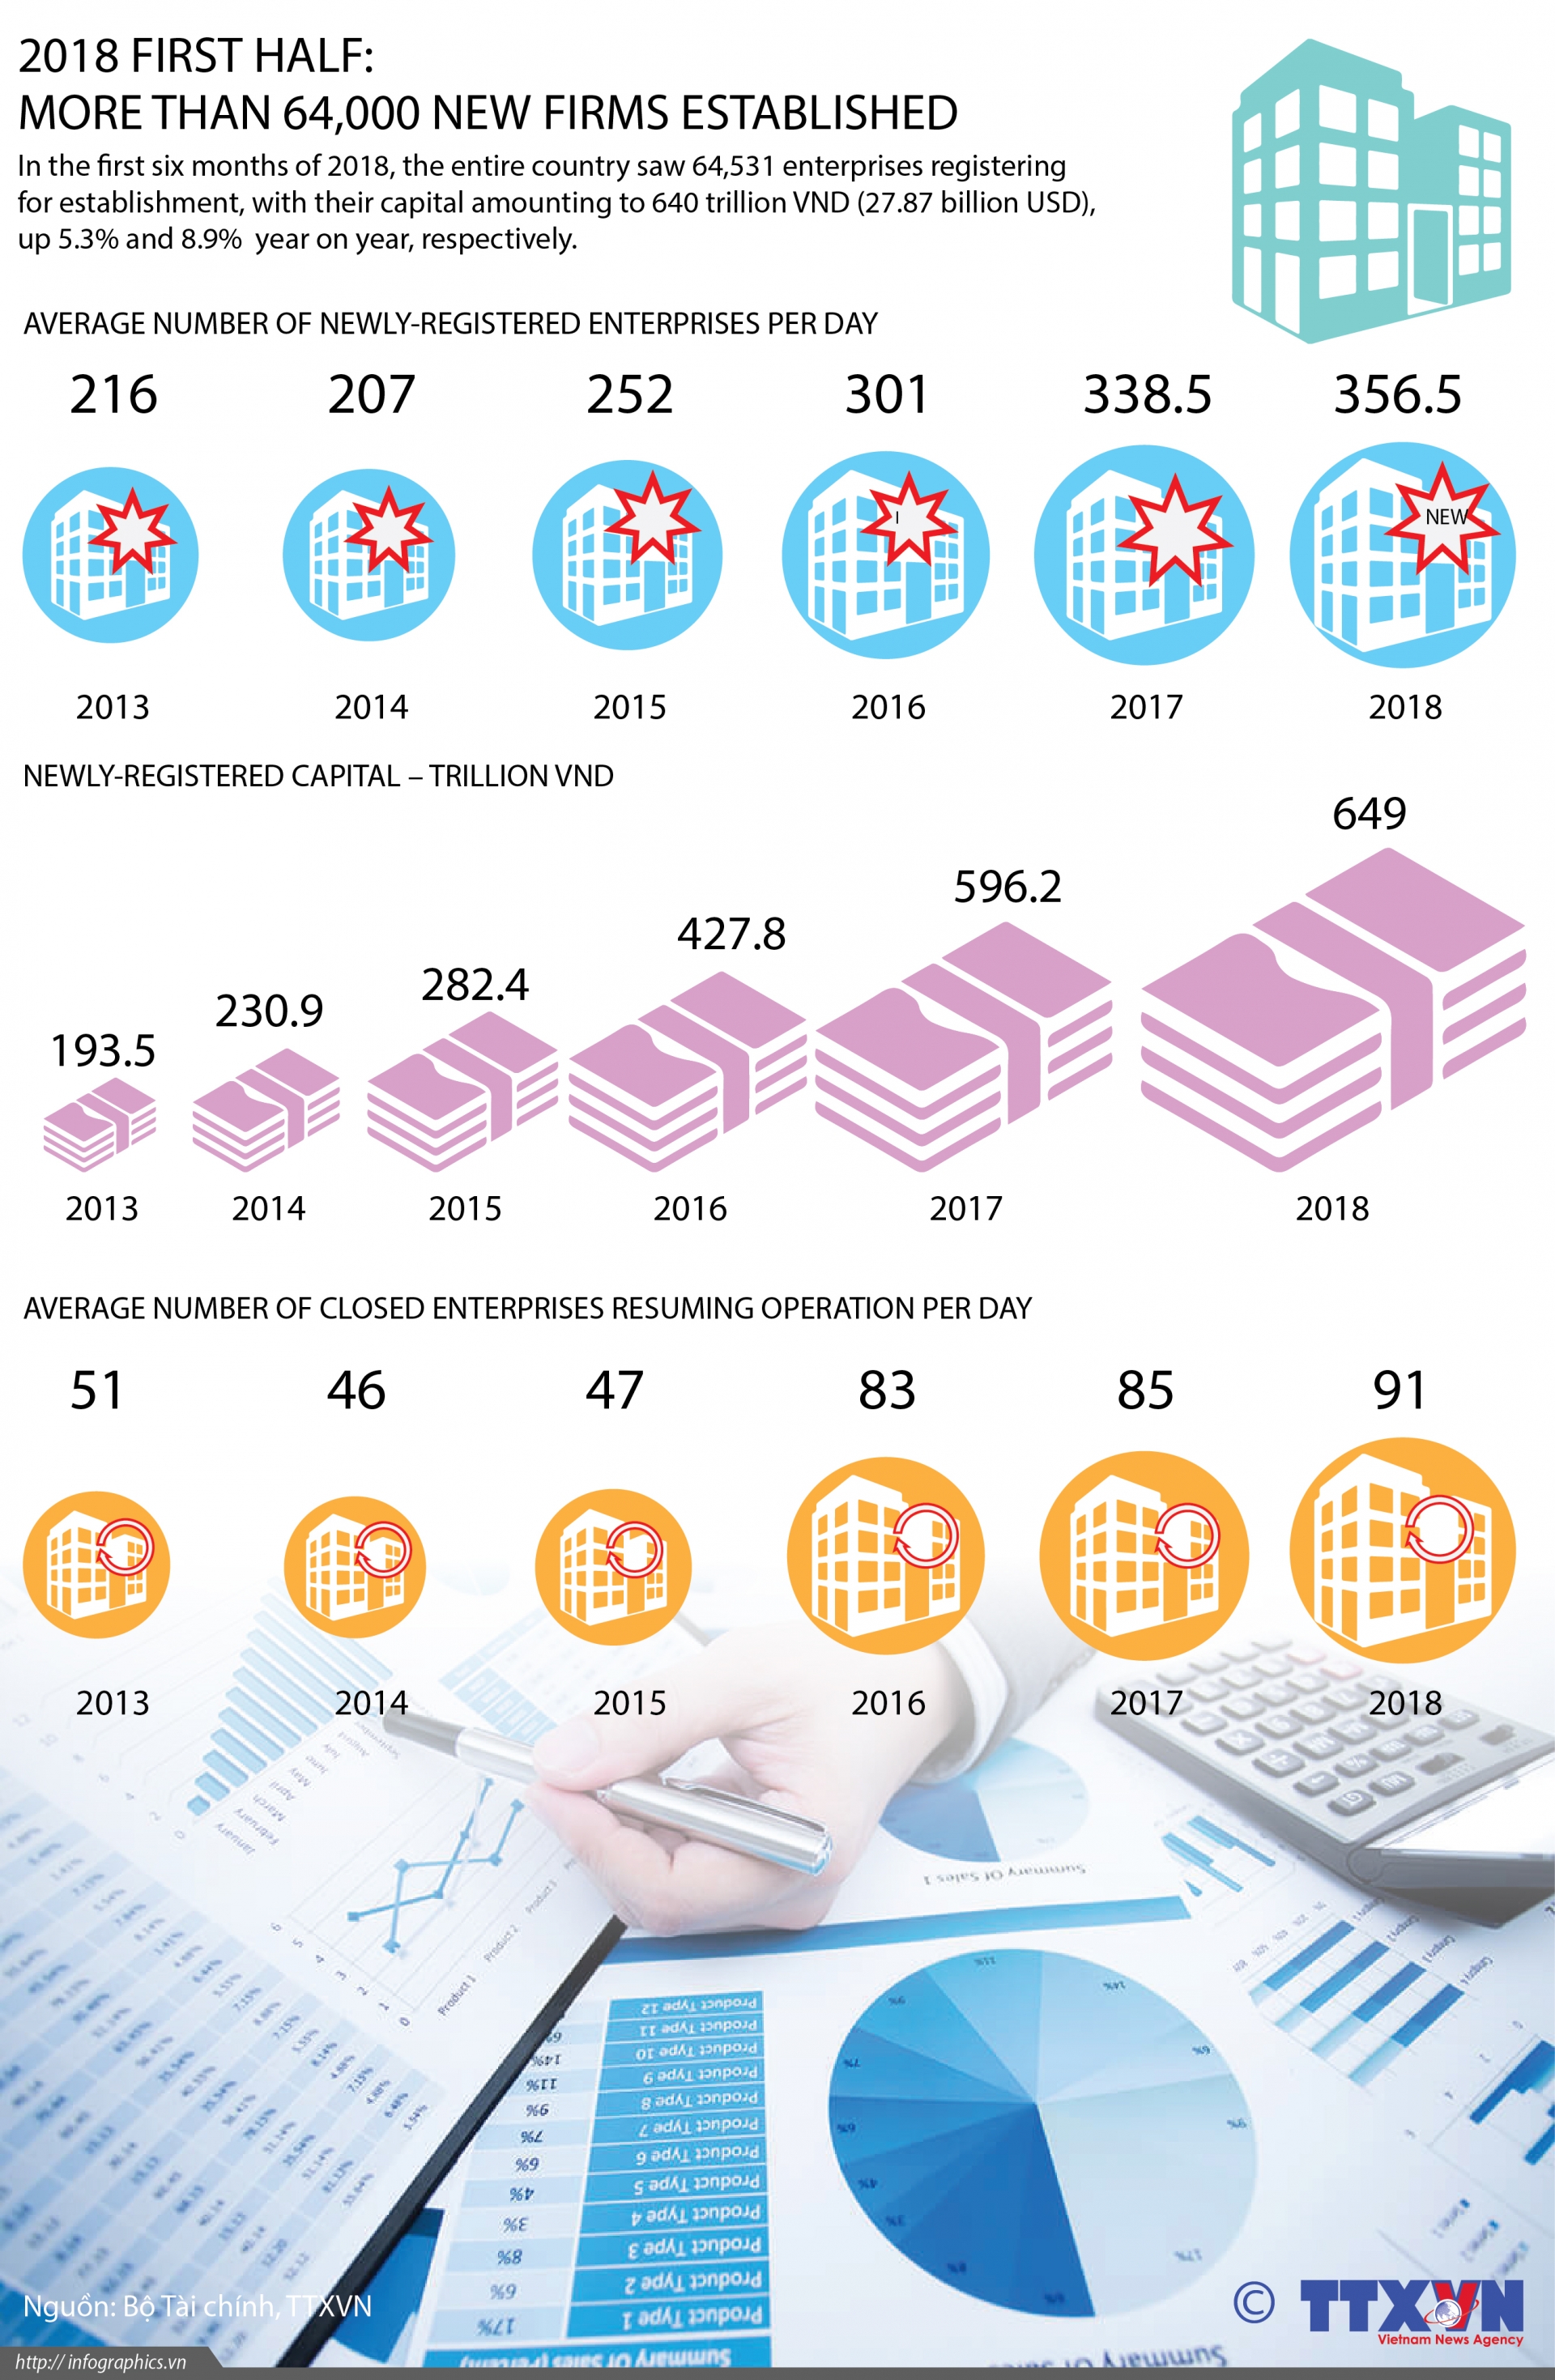 over 64000 news firms established in 2018s first half